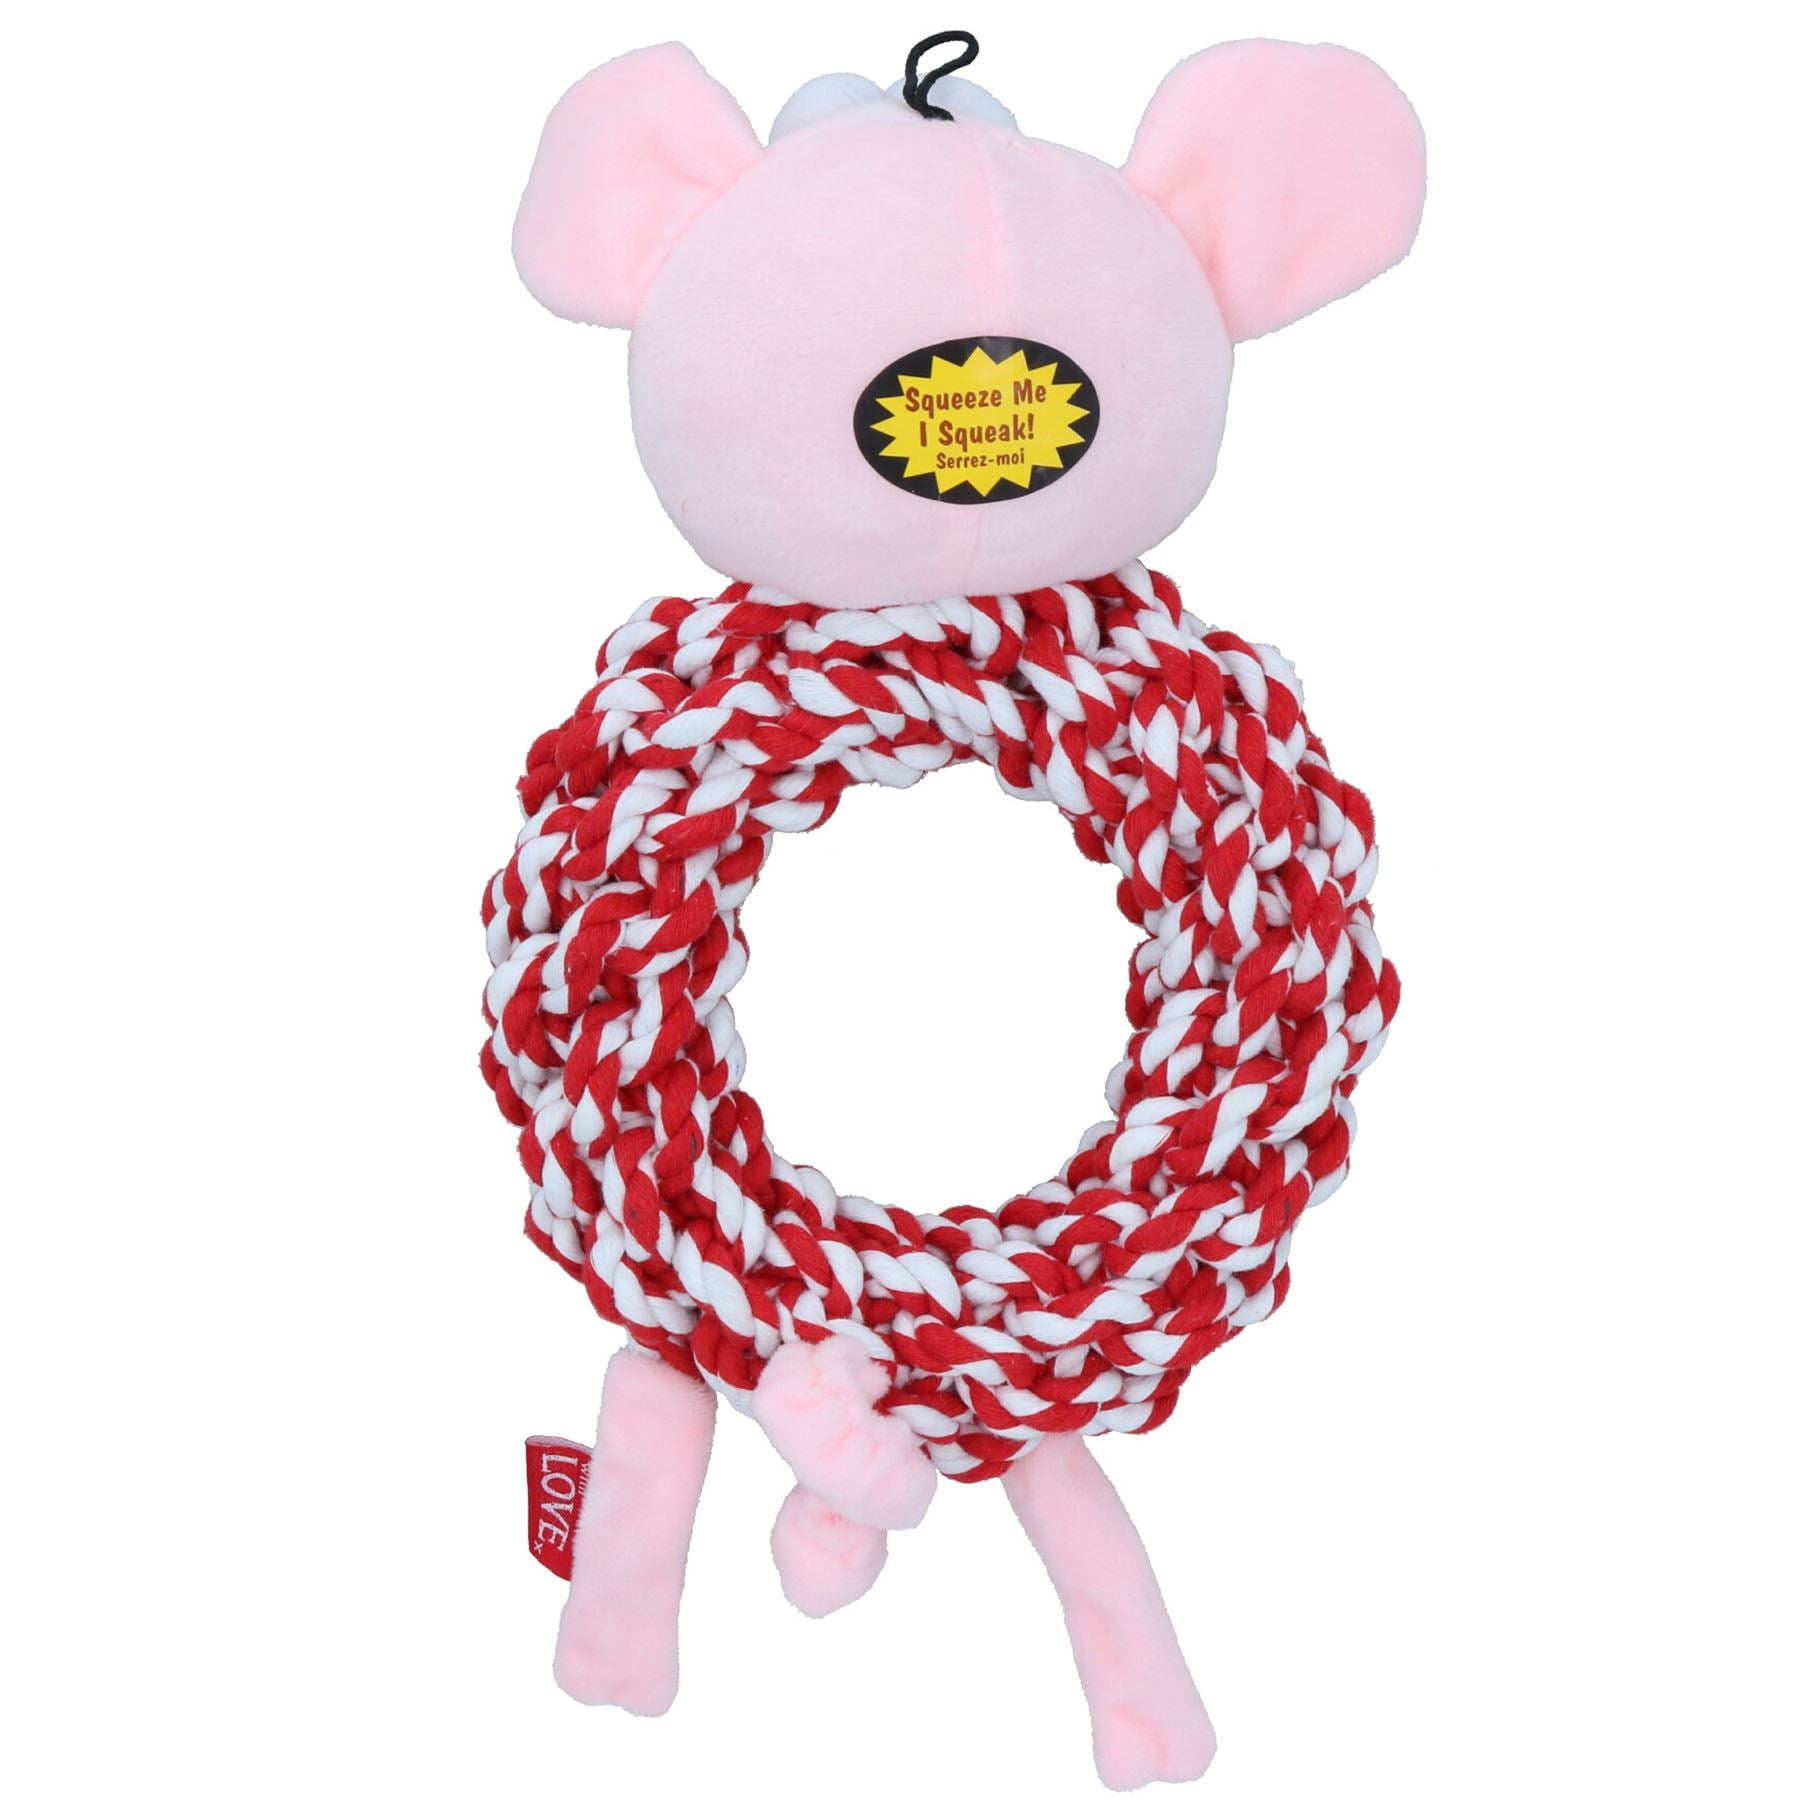 Dog Christmas Gift Knottie Ring Pig in Blanket Plush Rope Squeaky Play Toy